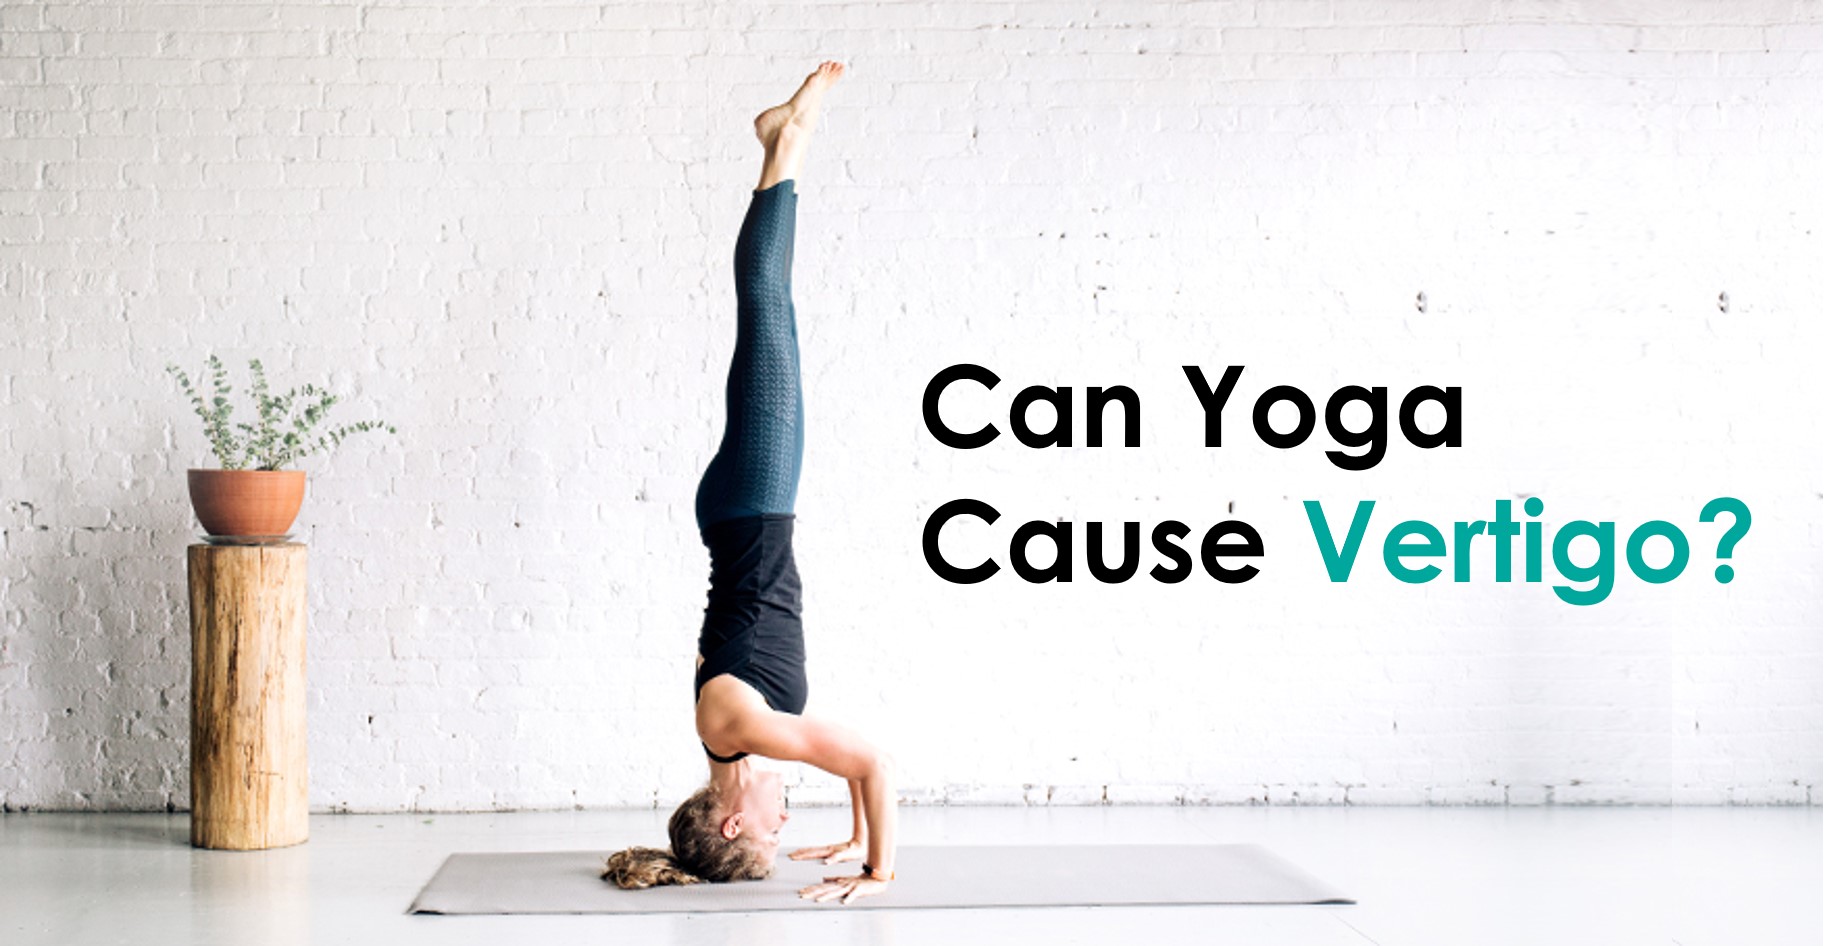 Make Your Practice Count: 3 Steps to More Effective Yoga Poses - YogaUOnline